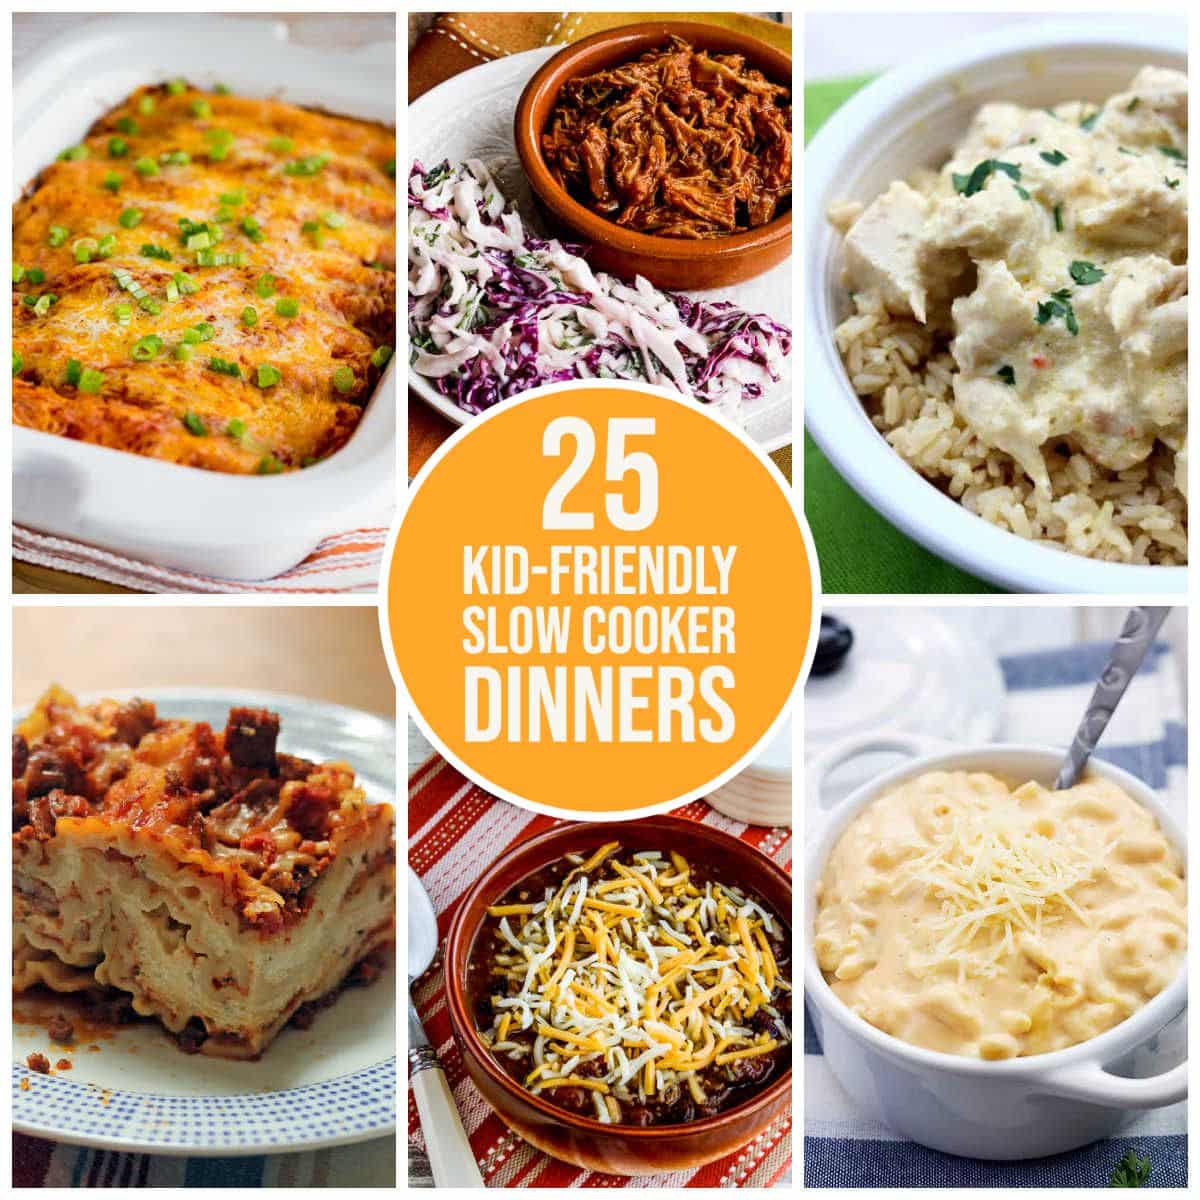 25 Kid-Friendly Slow Cooker Dinners collage of featured recipes with text overlay of title